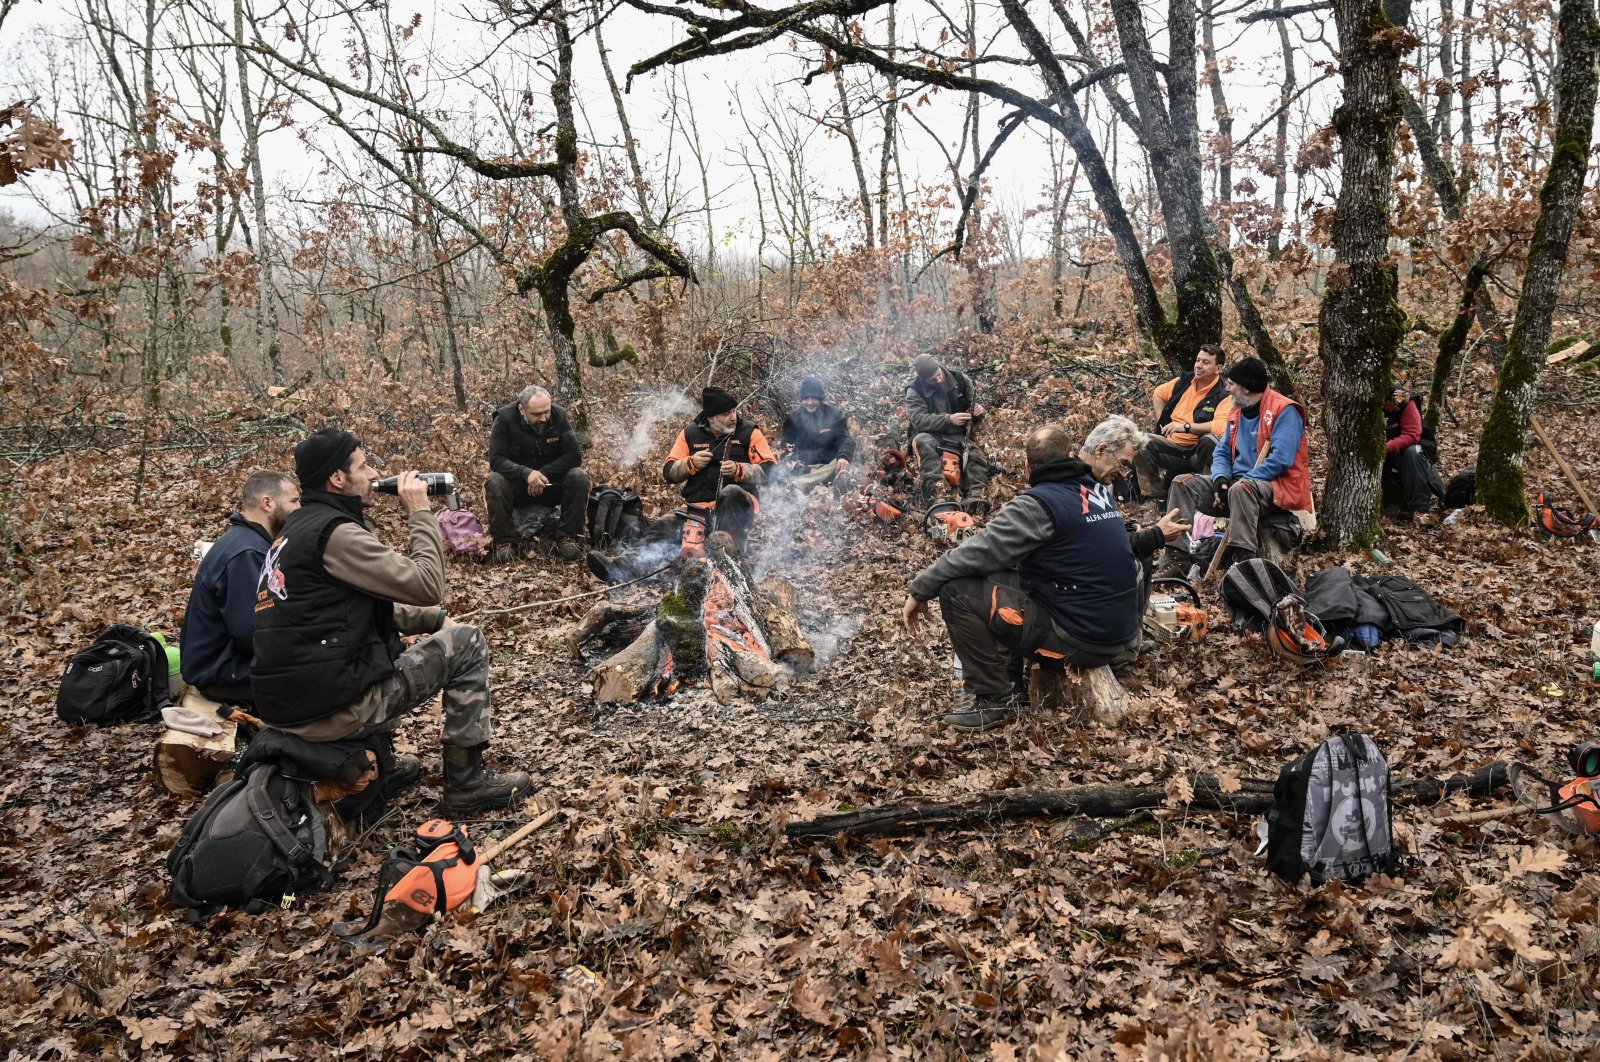 A group of lumberjacks take a rest around a woodfire in a forest near Grevena, northen Greece, Dec. 8, 2022. (AFP Photo)